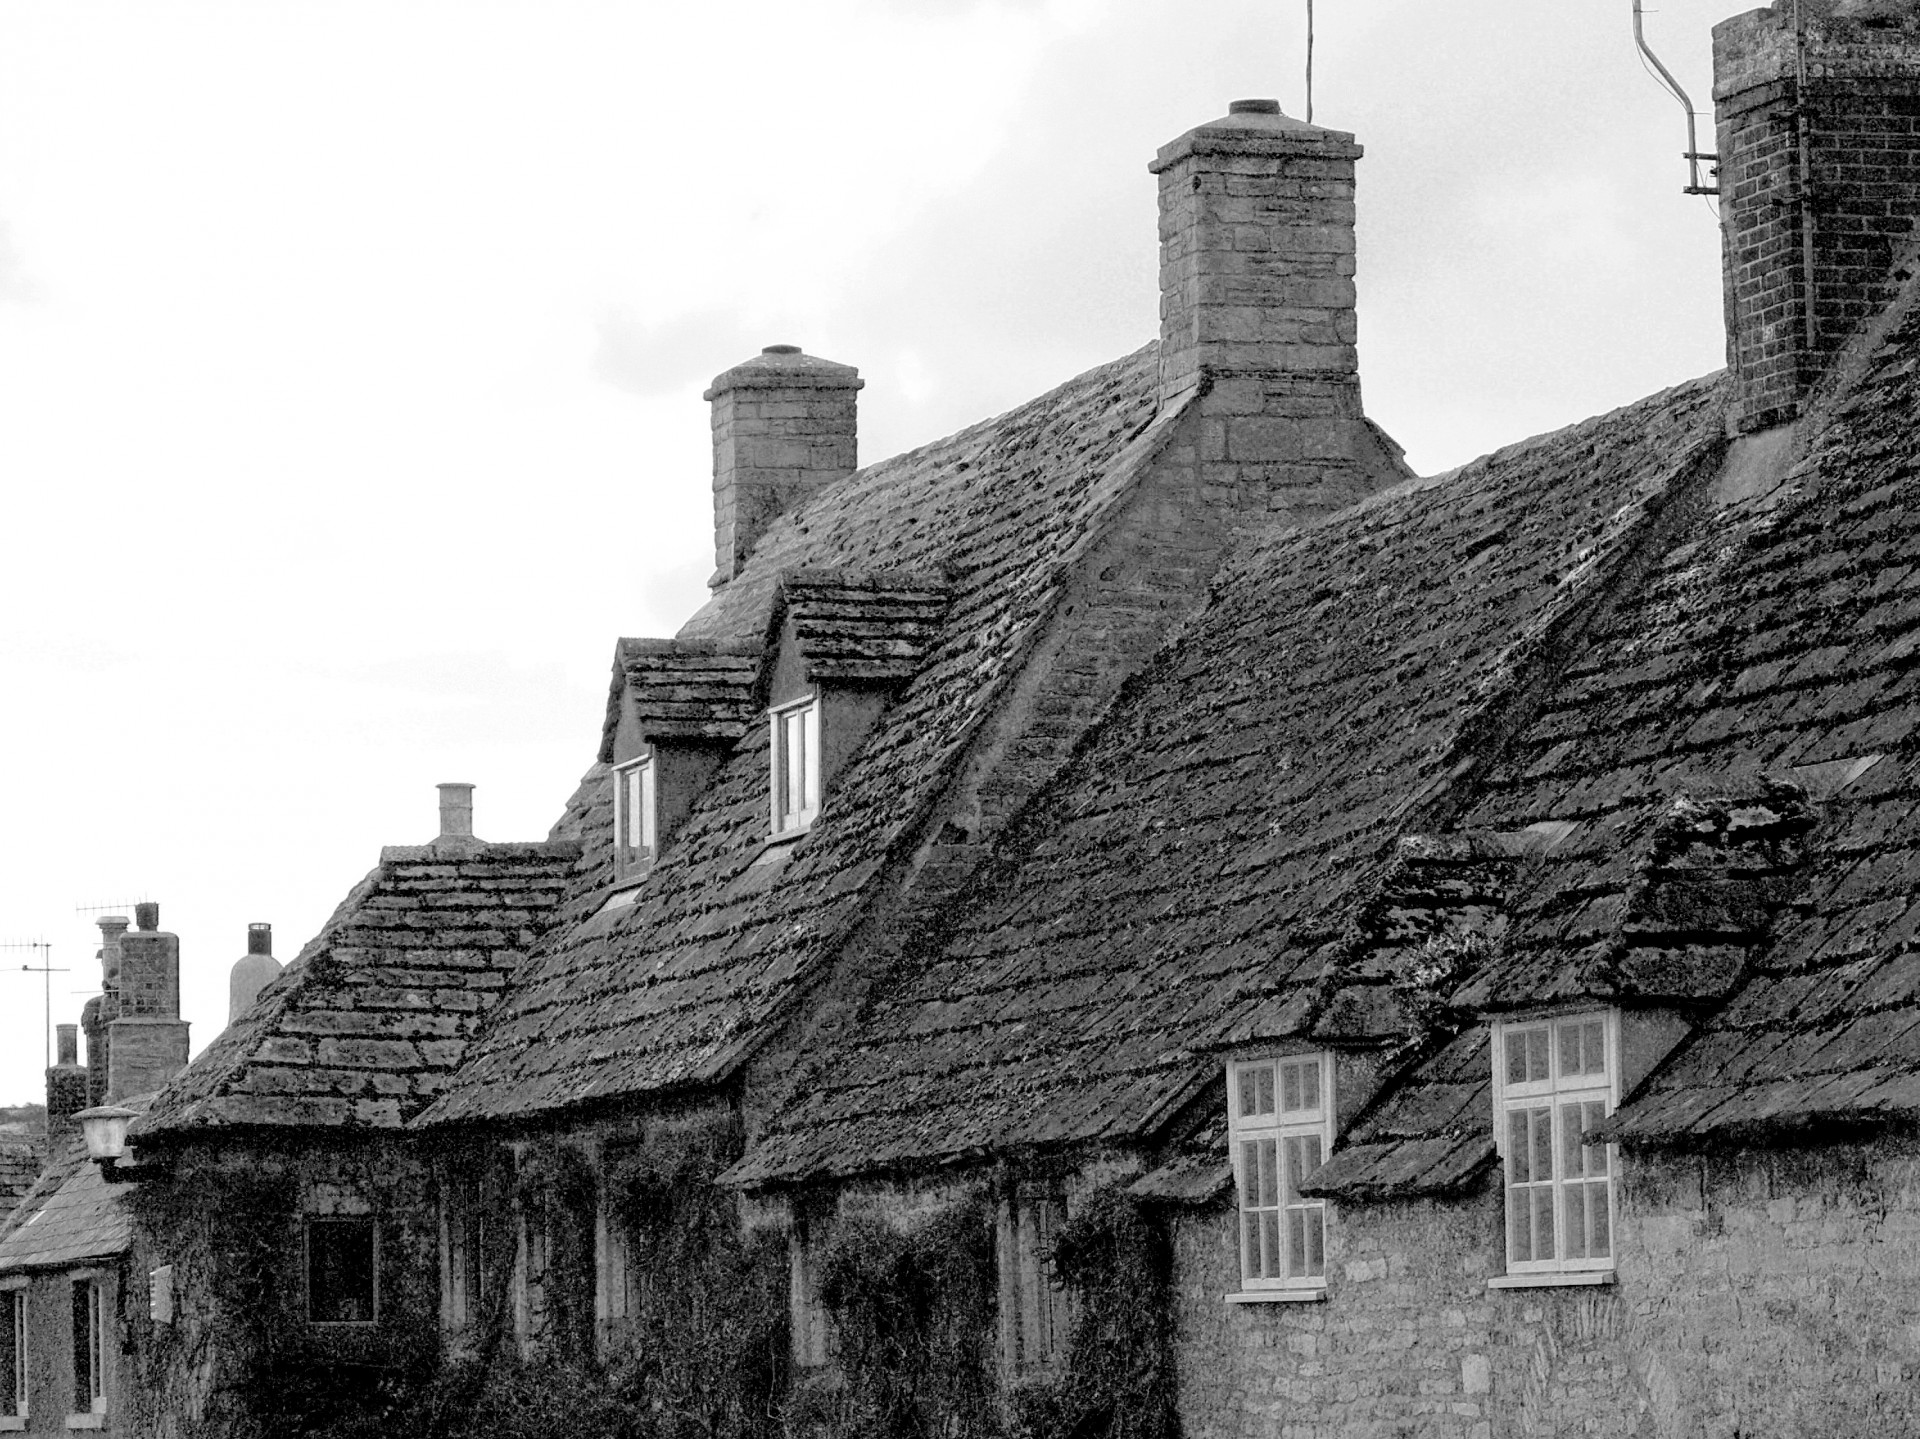 Roofs of old stone houses in village of Corfe